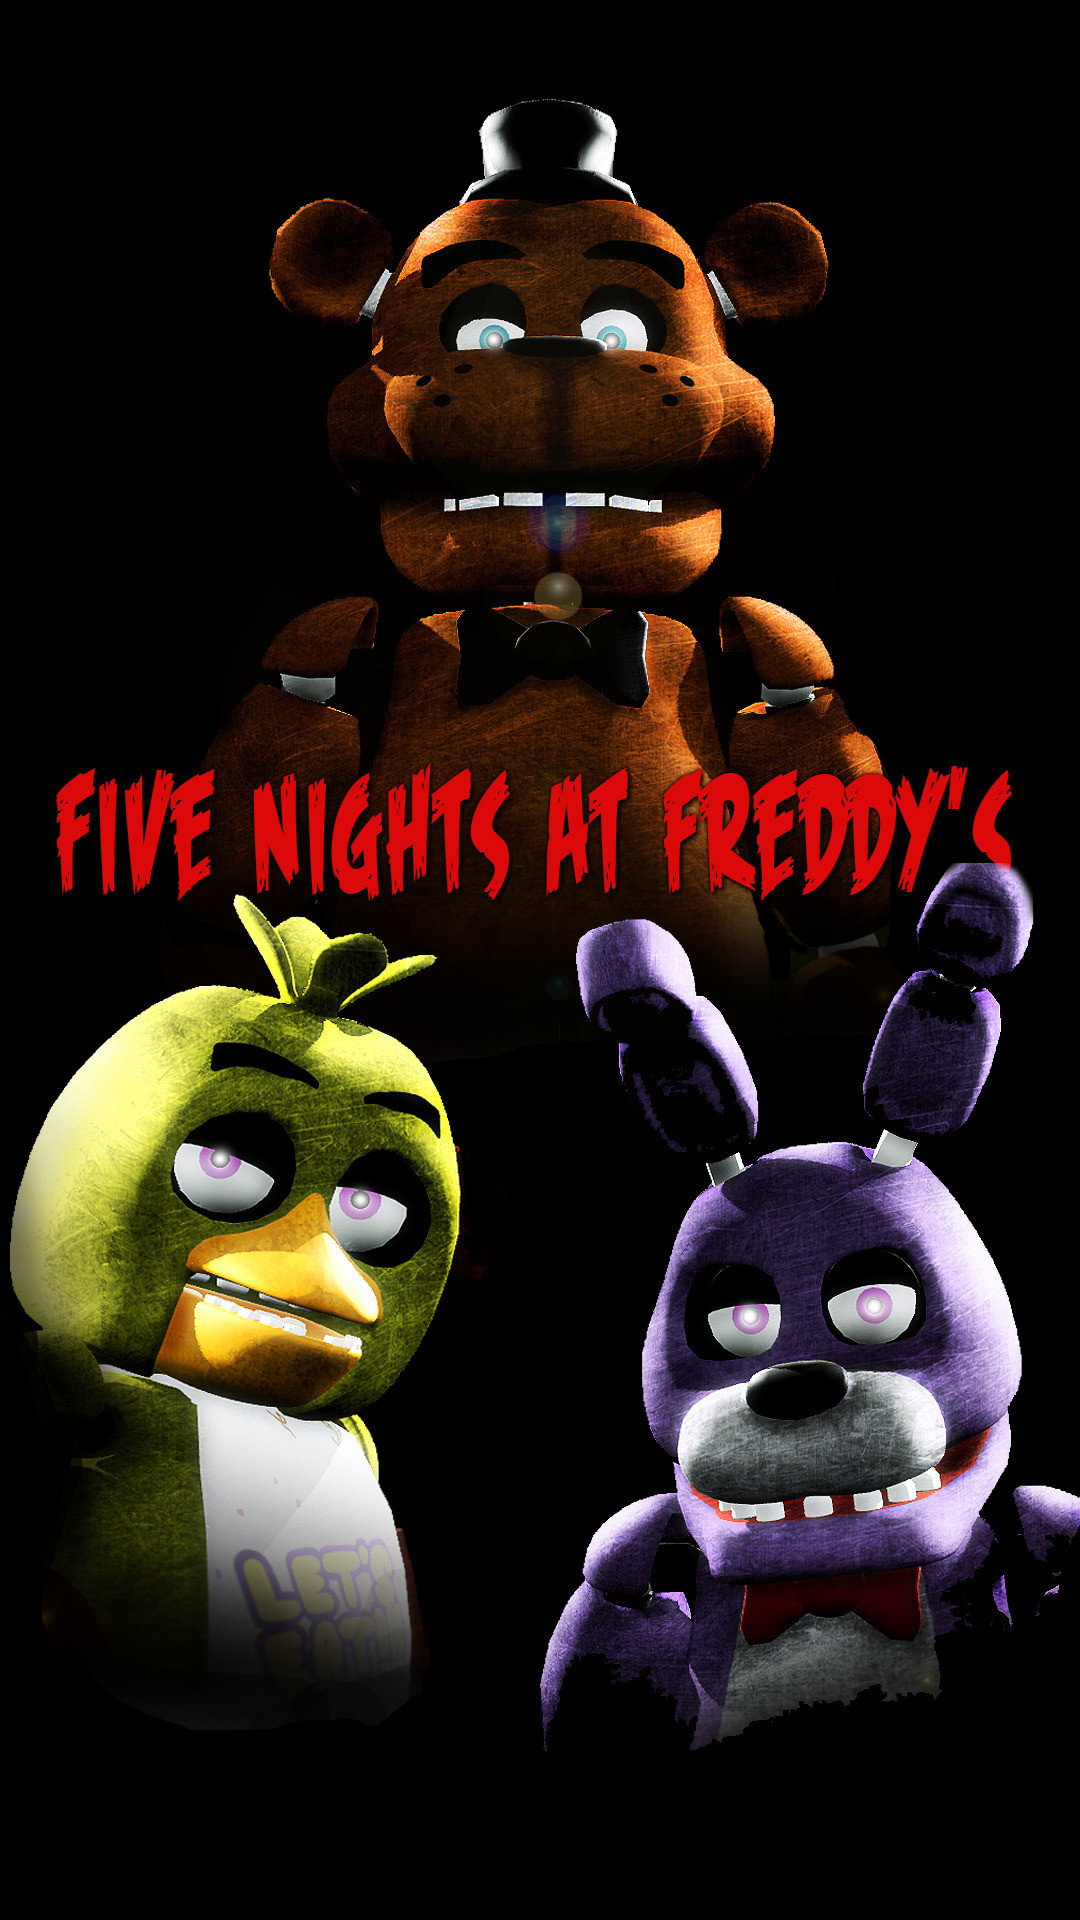 1080x1920 Five Nights at Freddy's Samsung Galaxy Note 3 wallpaper Resolution  [] by: FioreRose